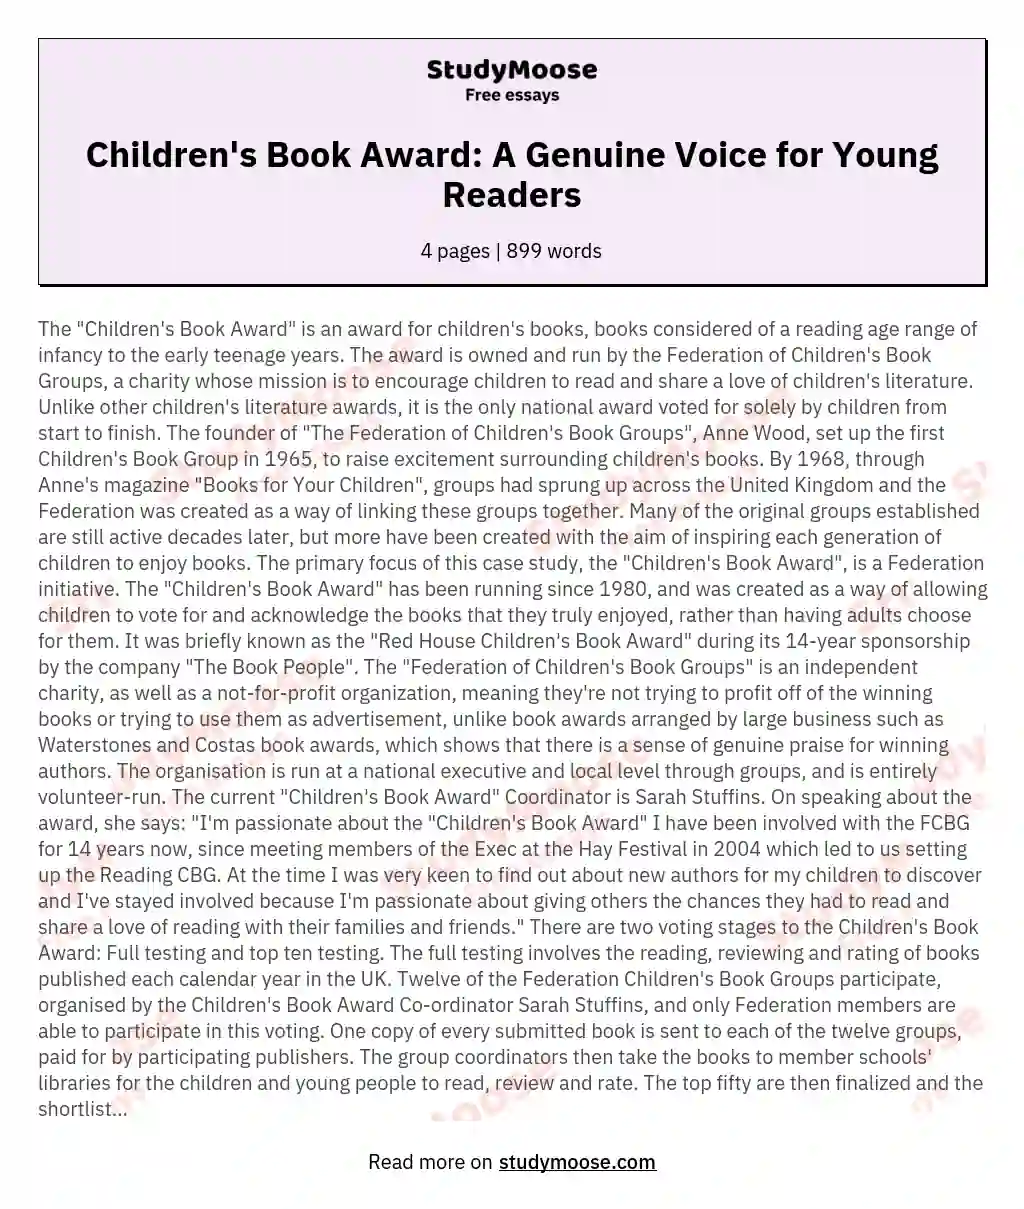 Children's Book Award: A Genuine Voice for Young Readers essay